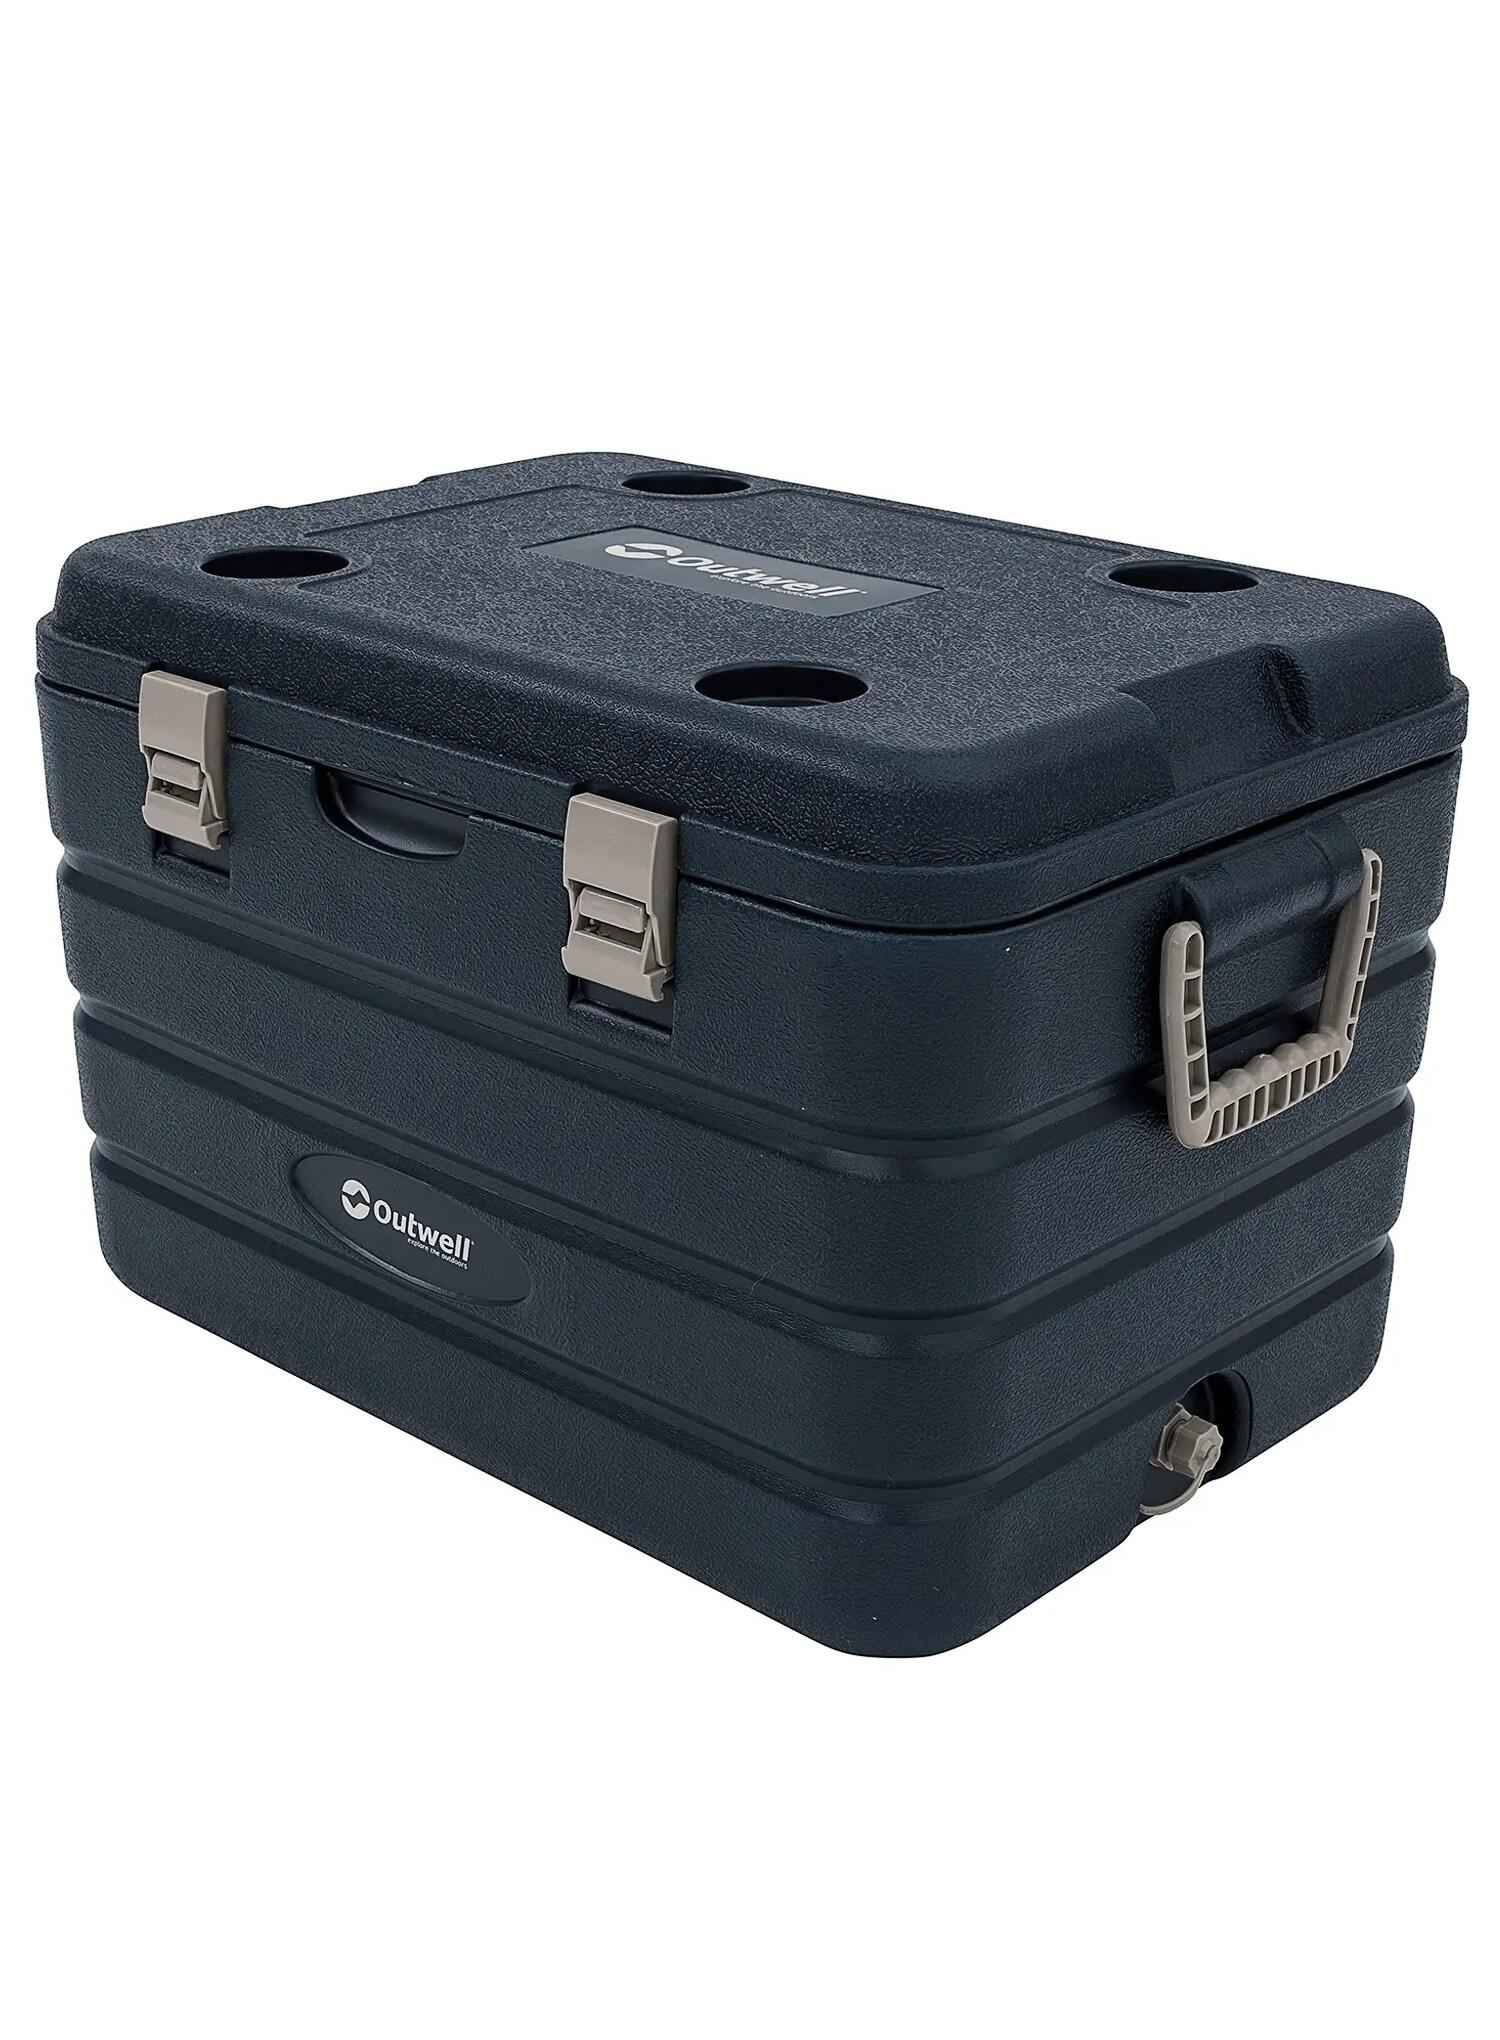 OUTWELL Outwell 590150 Fulmar 60L Deep Freeze Cool Box